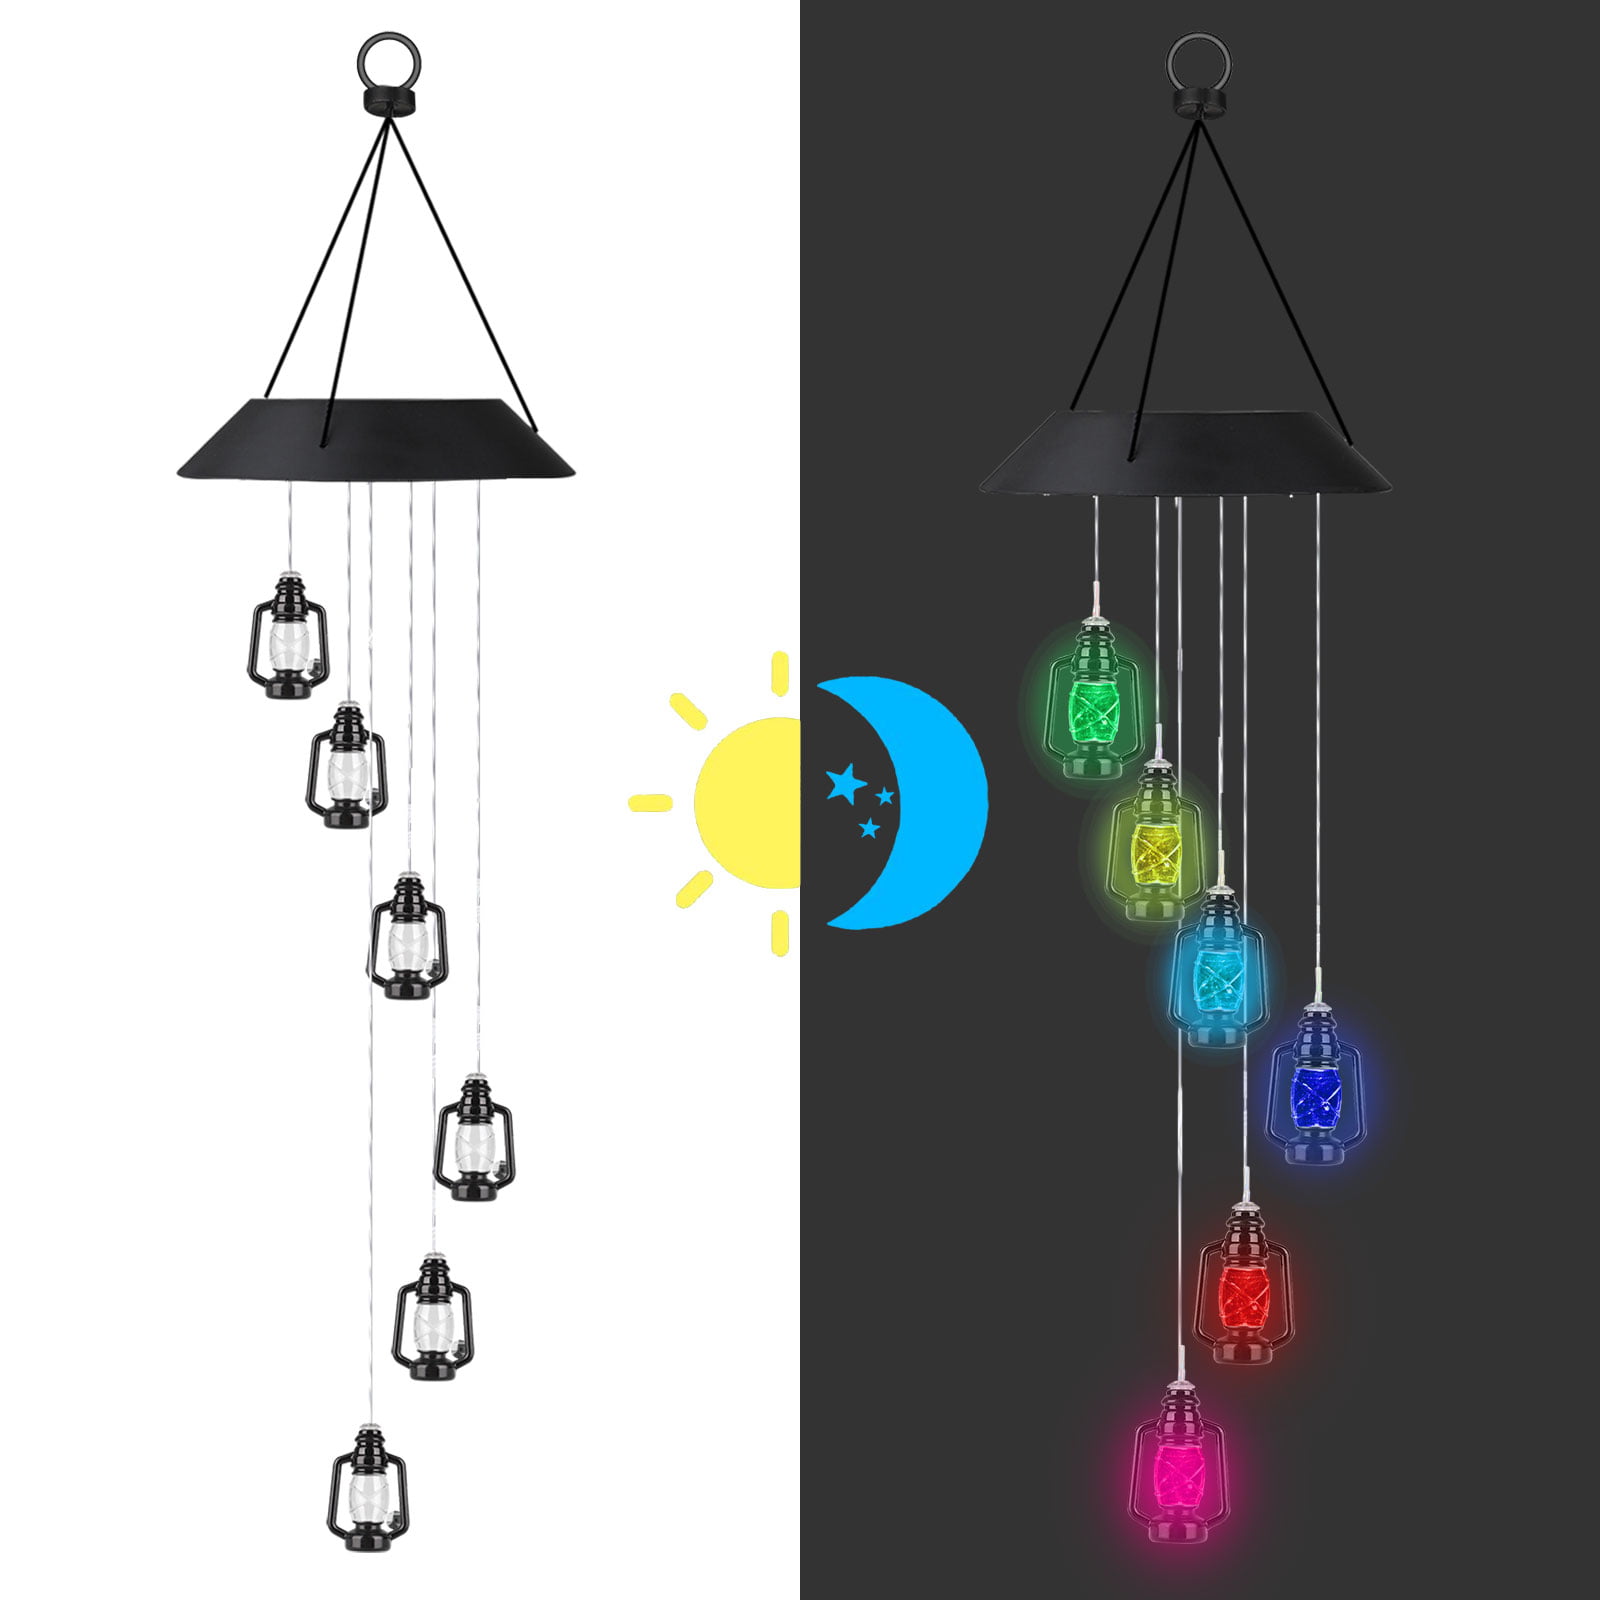 Type 1 Wind Chime Solar Light Swonuk Outdoor Color-Changing LED Wind Chime Decorative Windbell Light for Garden Patio Yard Deck